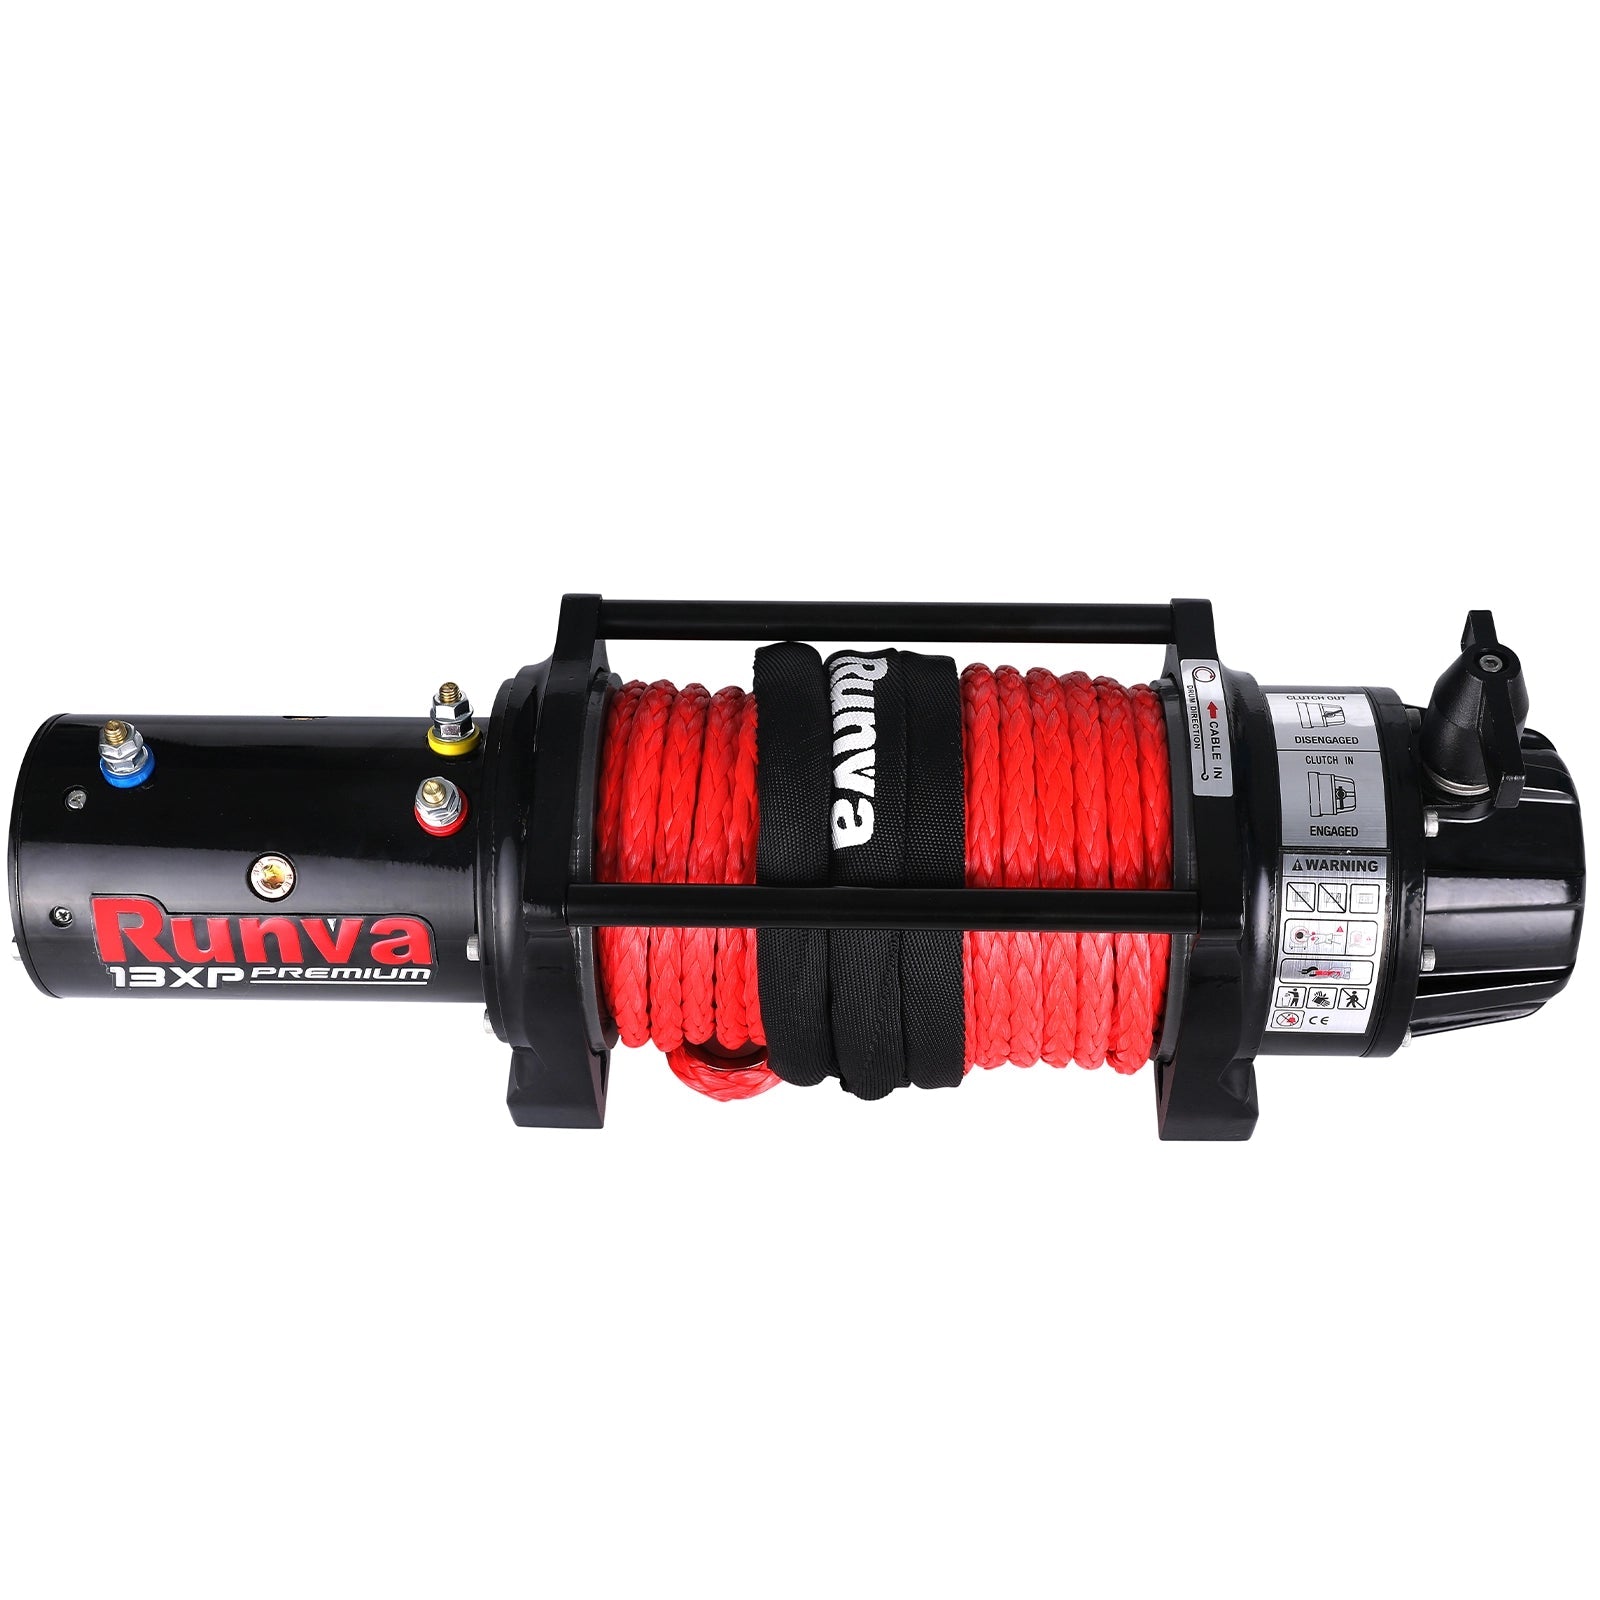 Runva 13xp winch with red rope